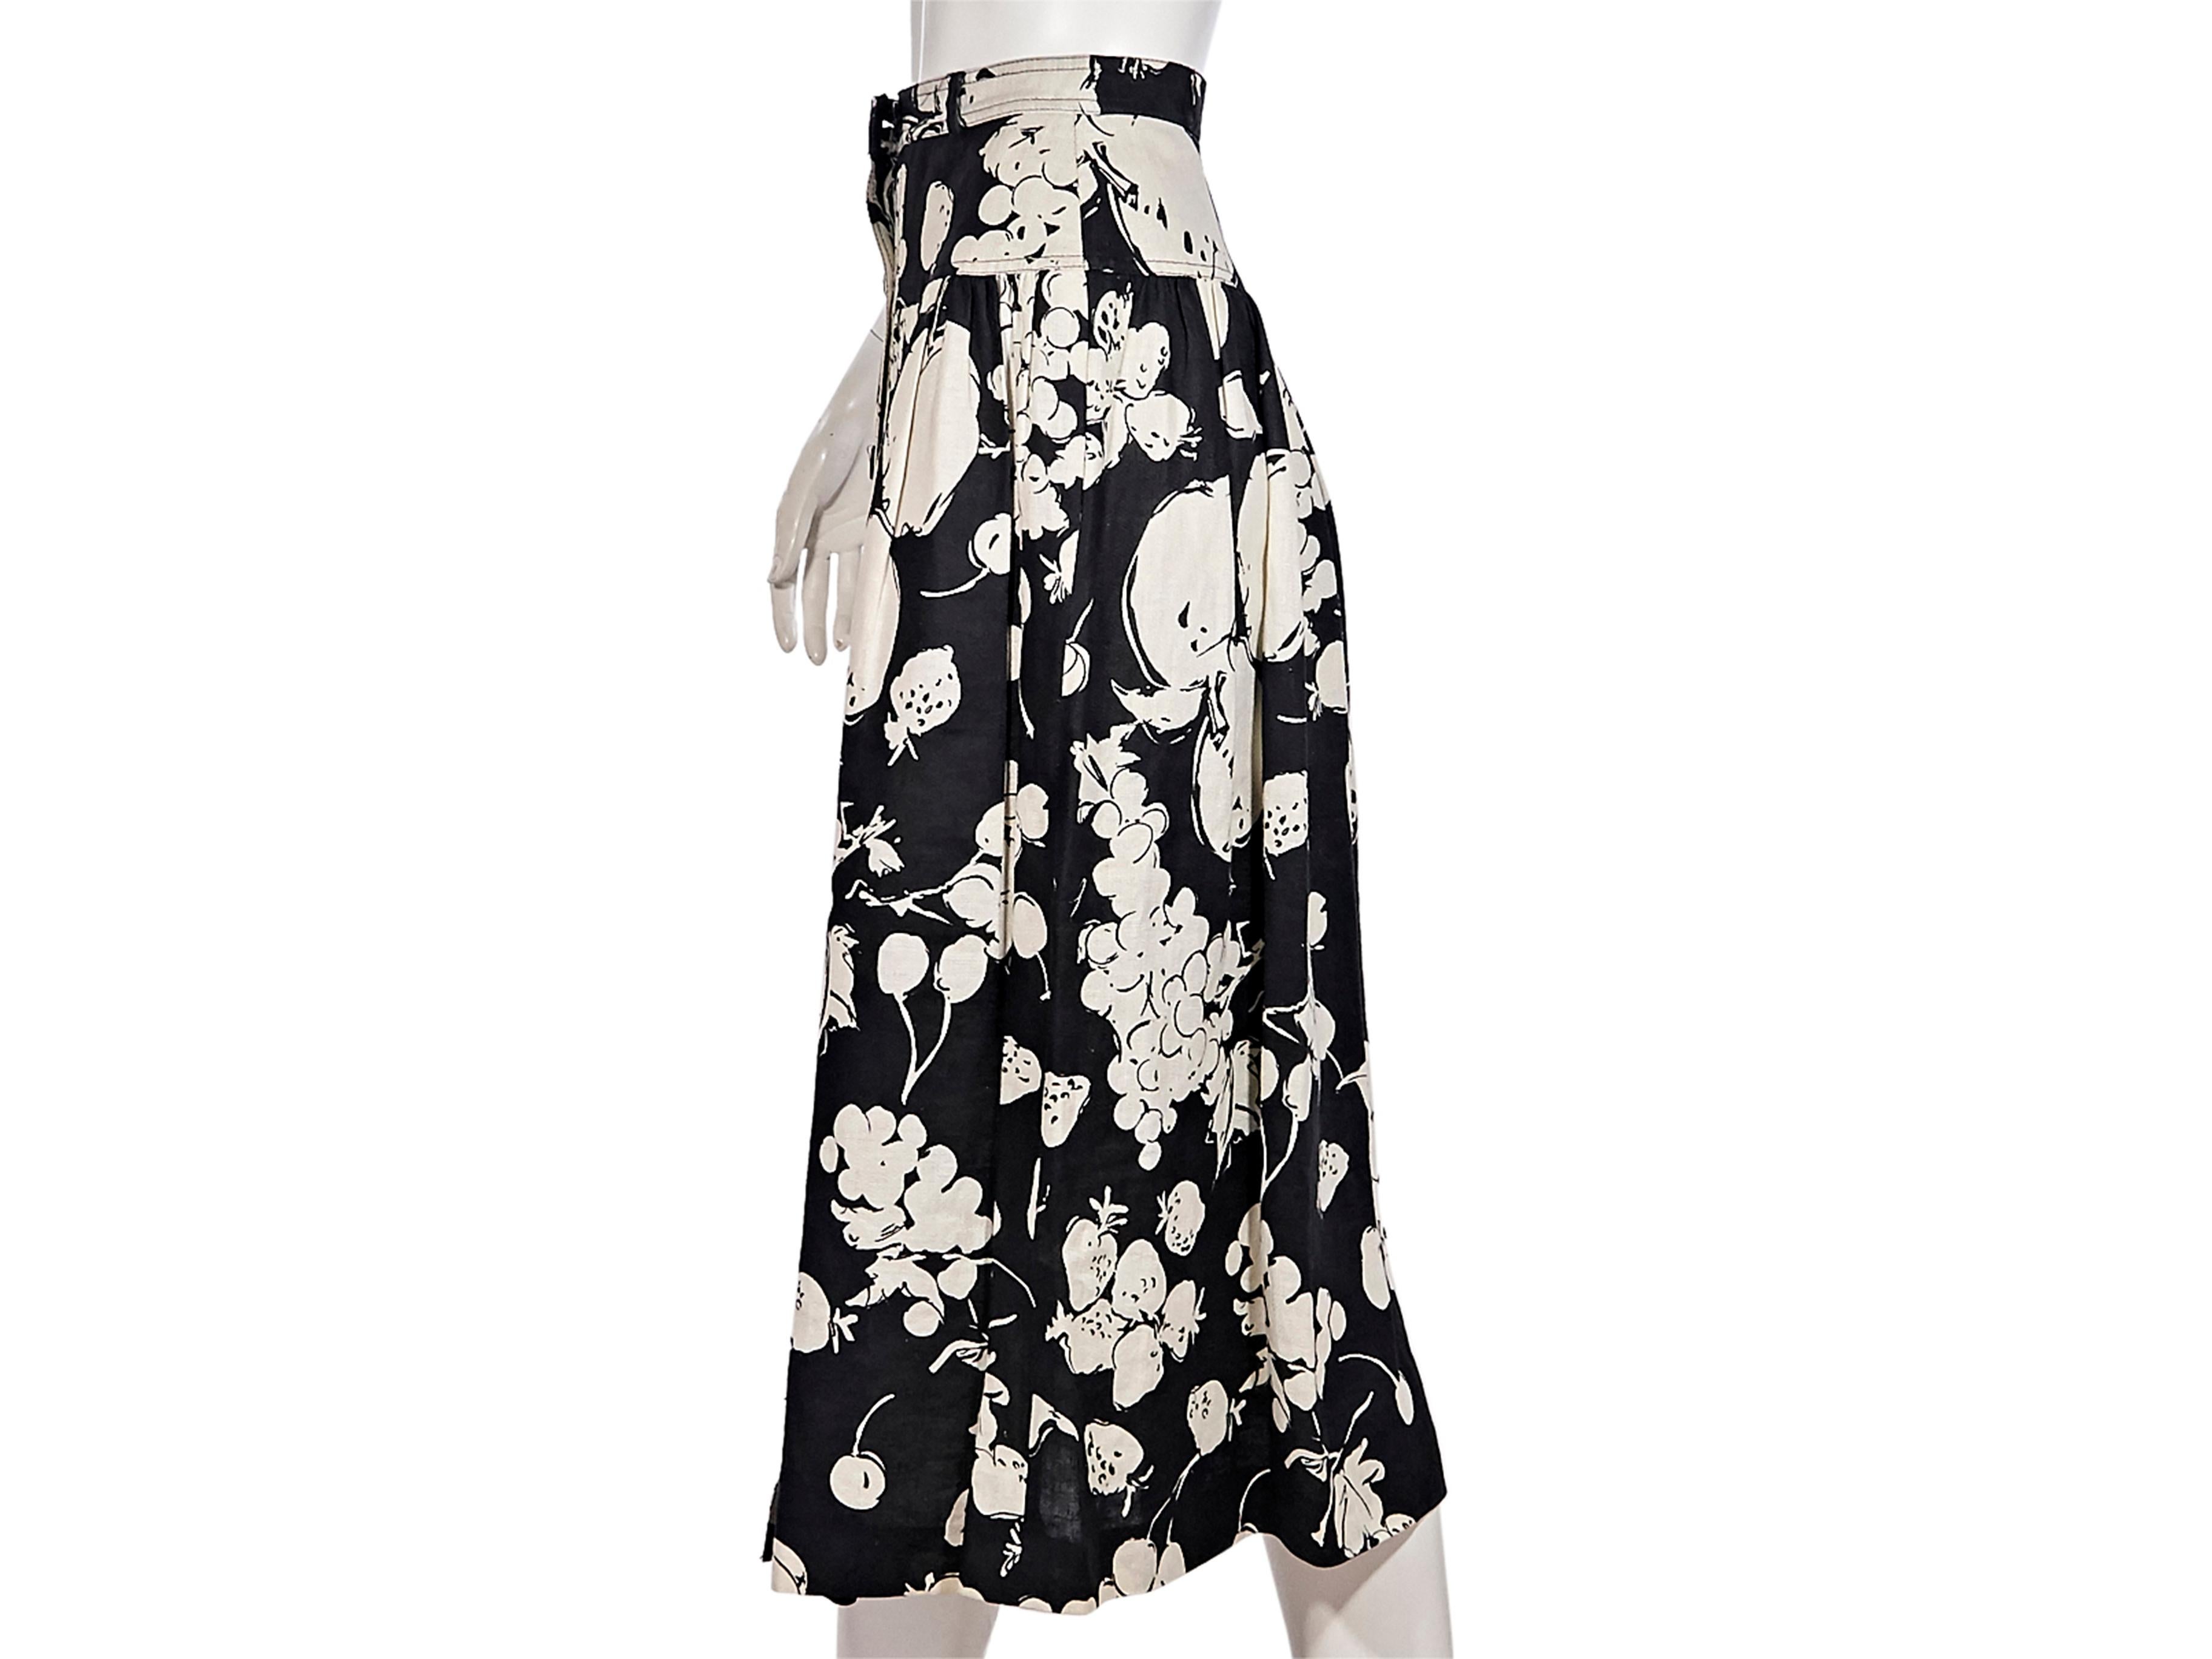 Product details:  Vintage black and white fruit-printed linen skirt by Valentino.  Banded waist.  Button-front closure.  24